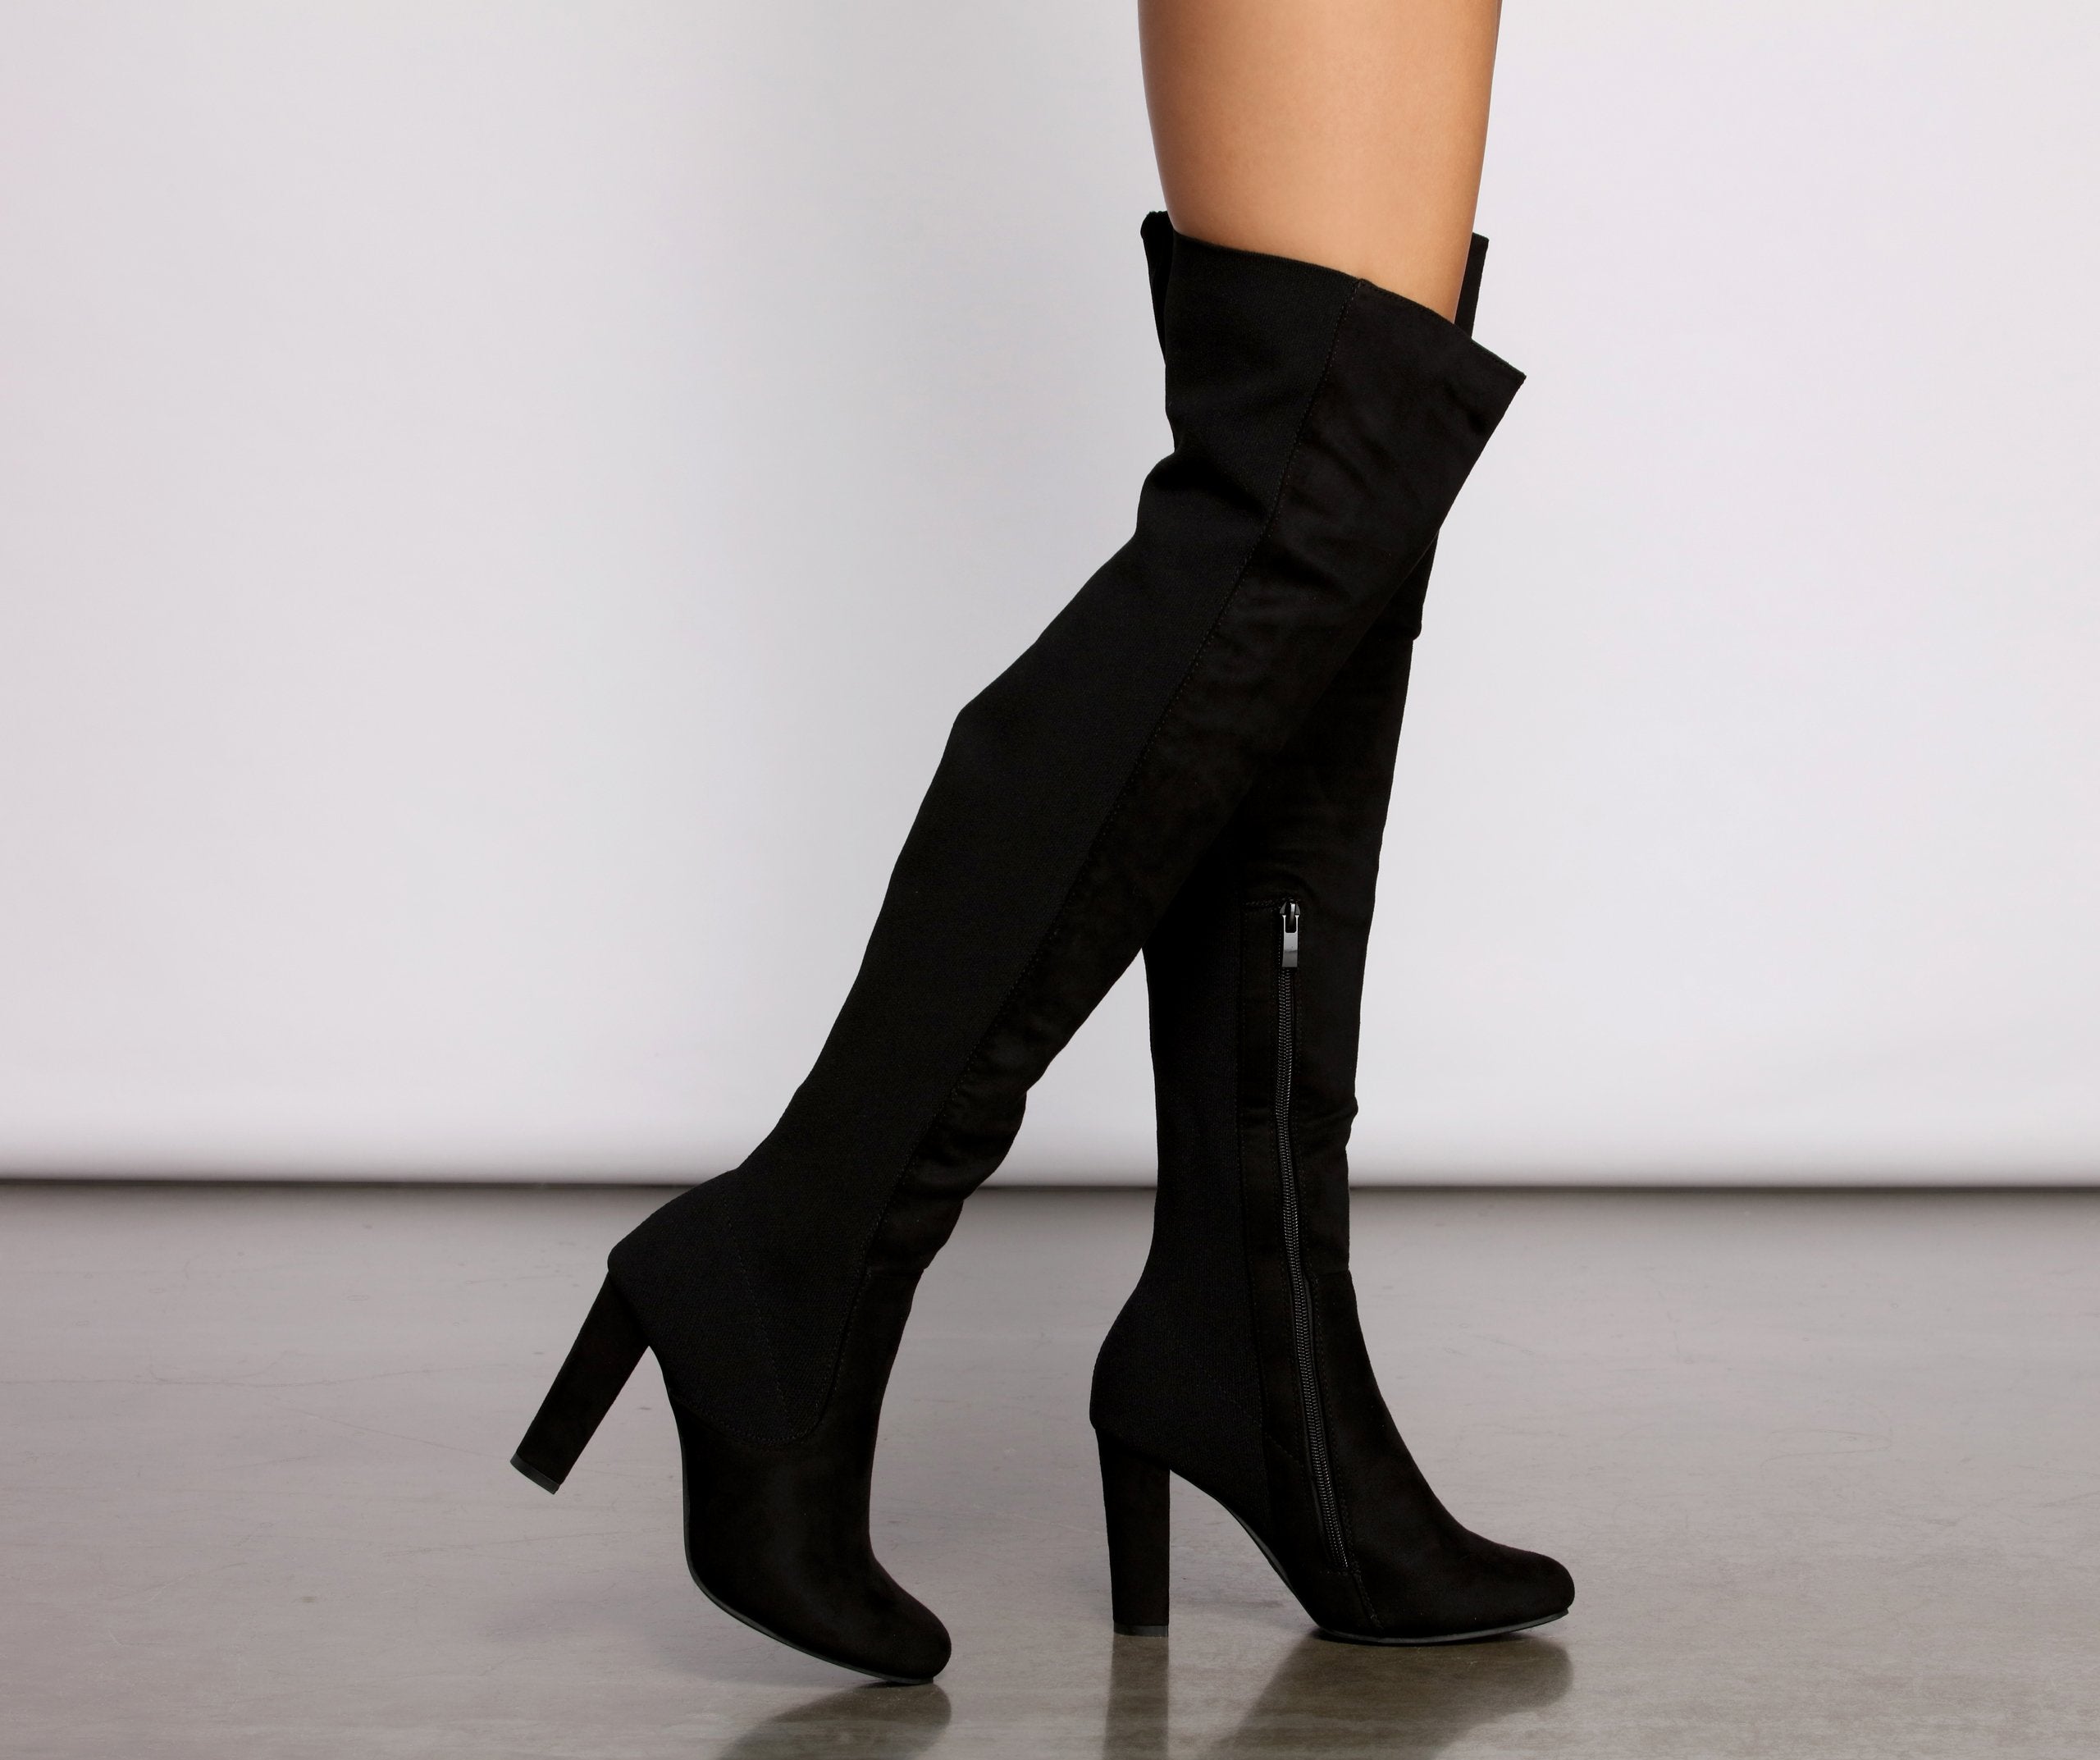 50/50 Trendy Stunner Over The Knee Boots